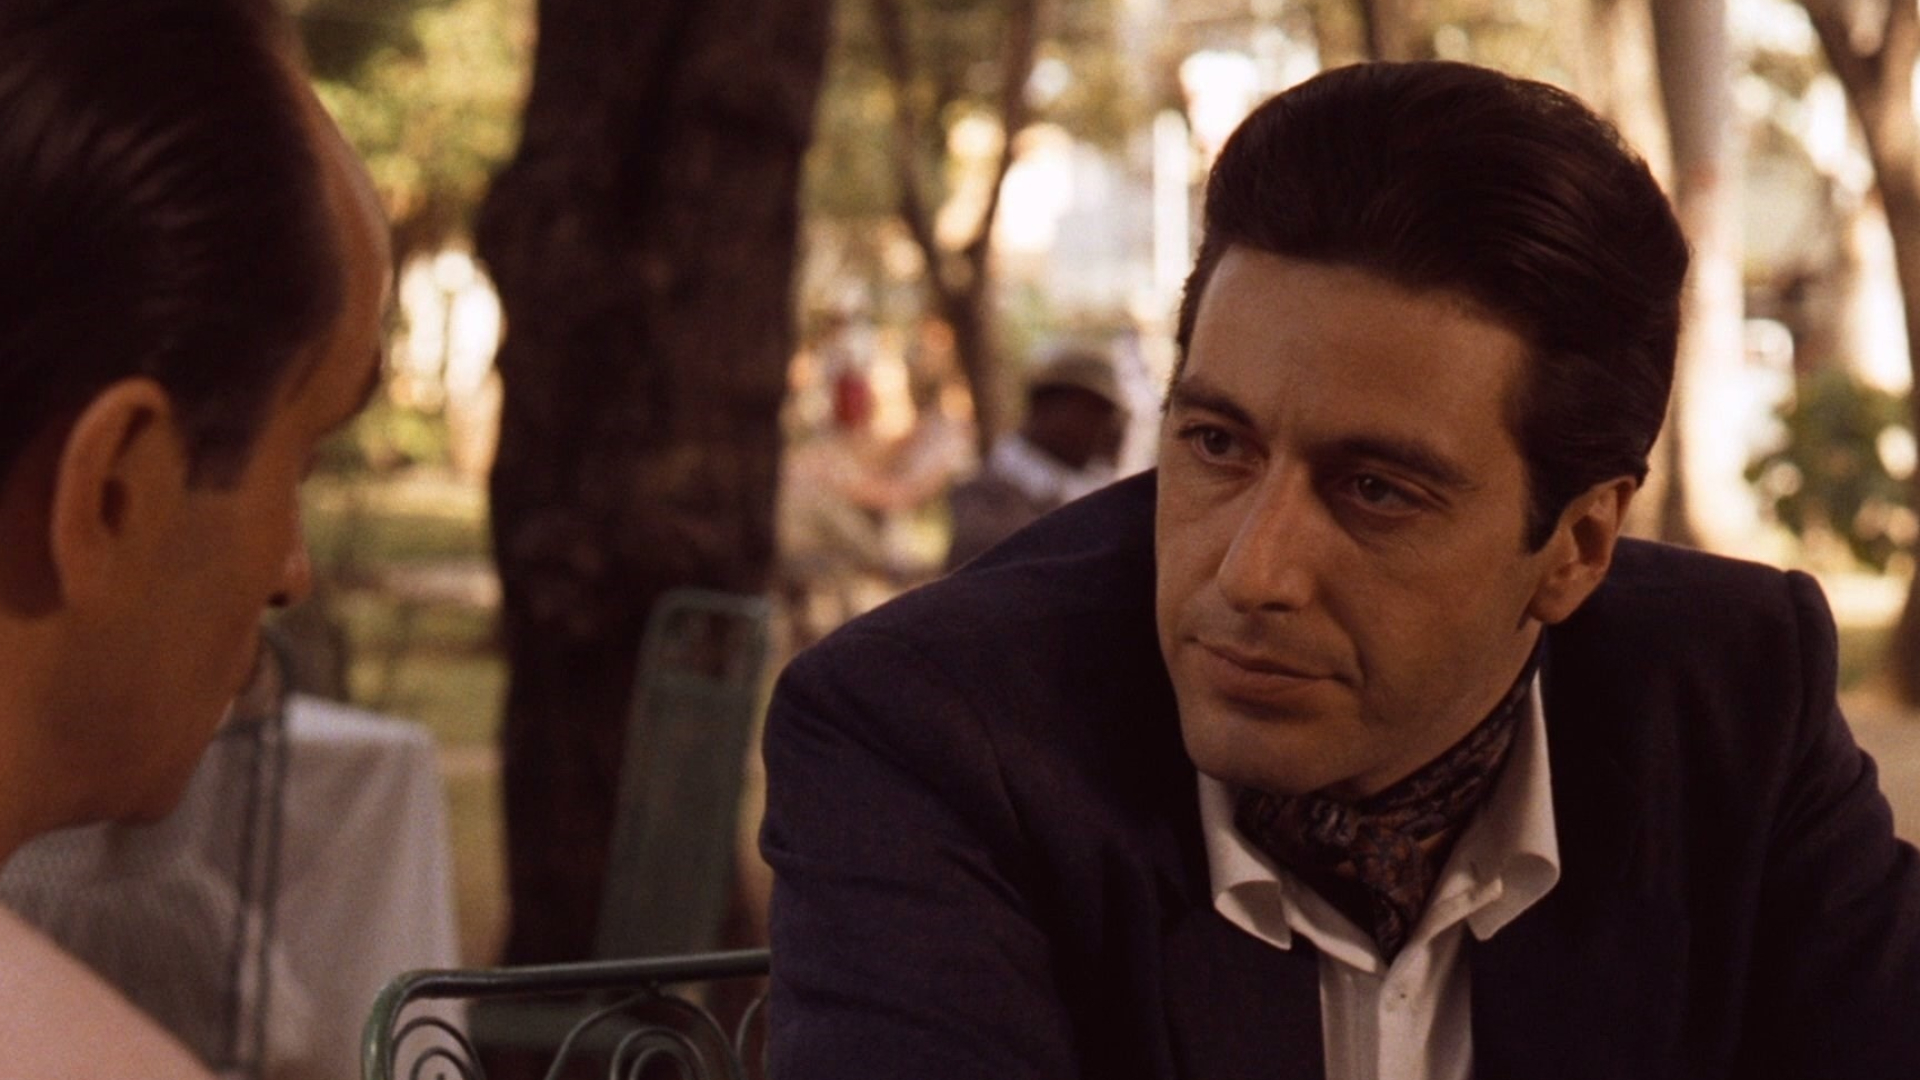 Michael Corleone wallpapers, Background pictures, Mobile wallpaper, Christmas, 1920x1080 Full HD Desktop